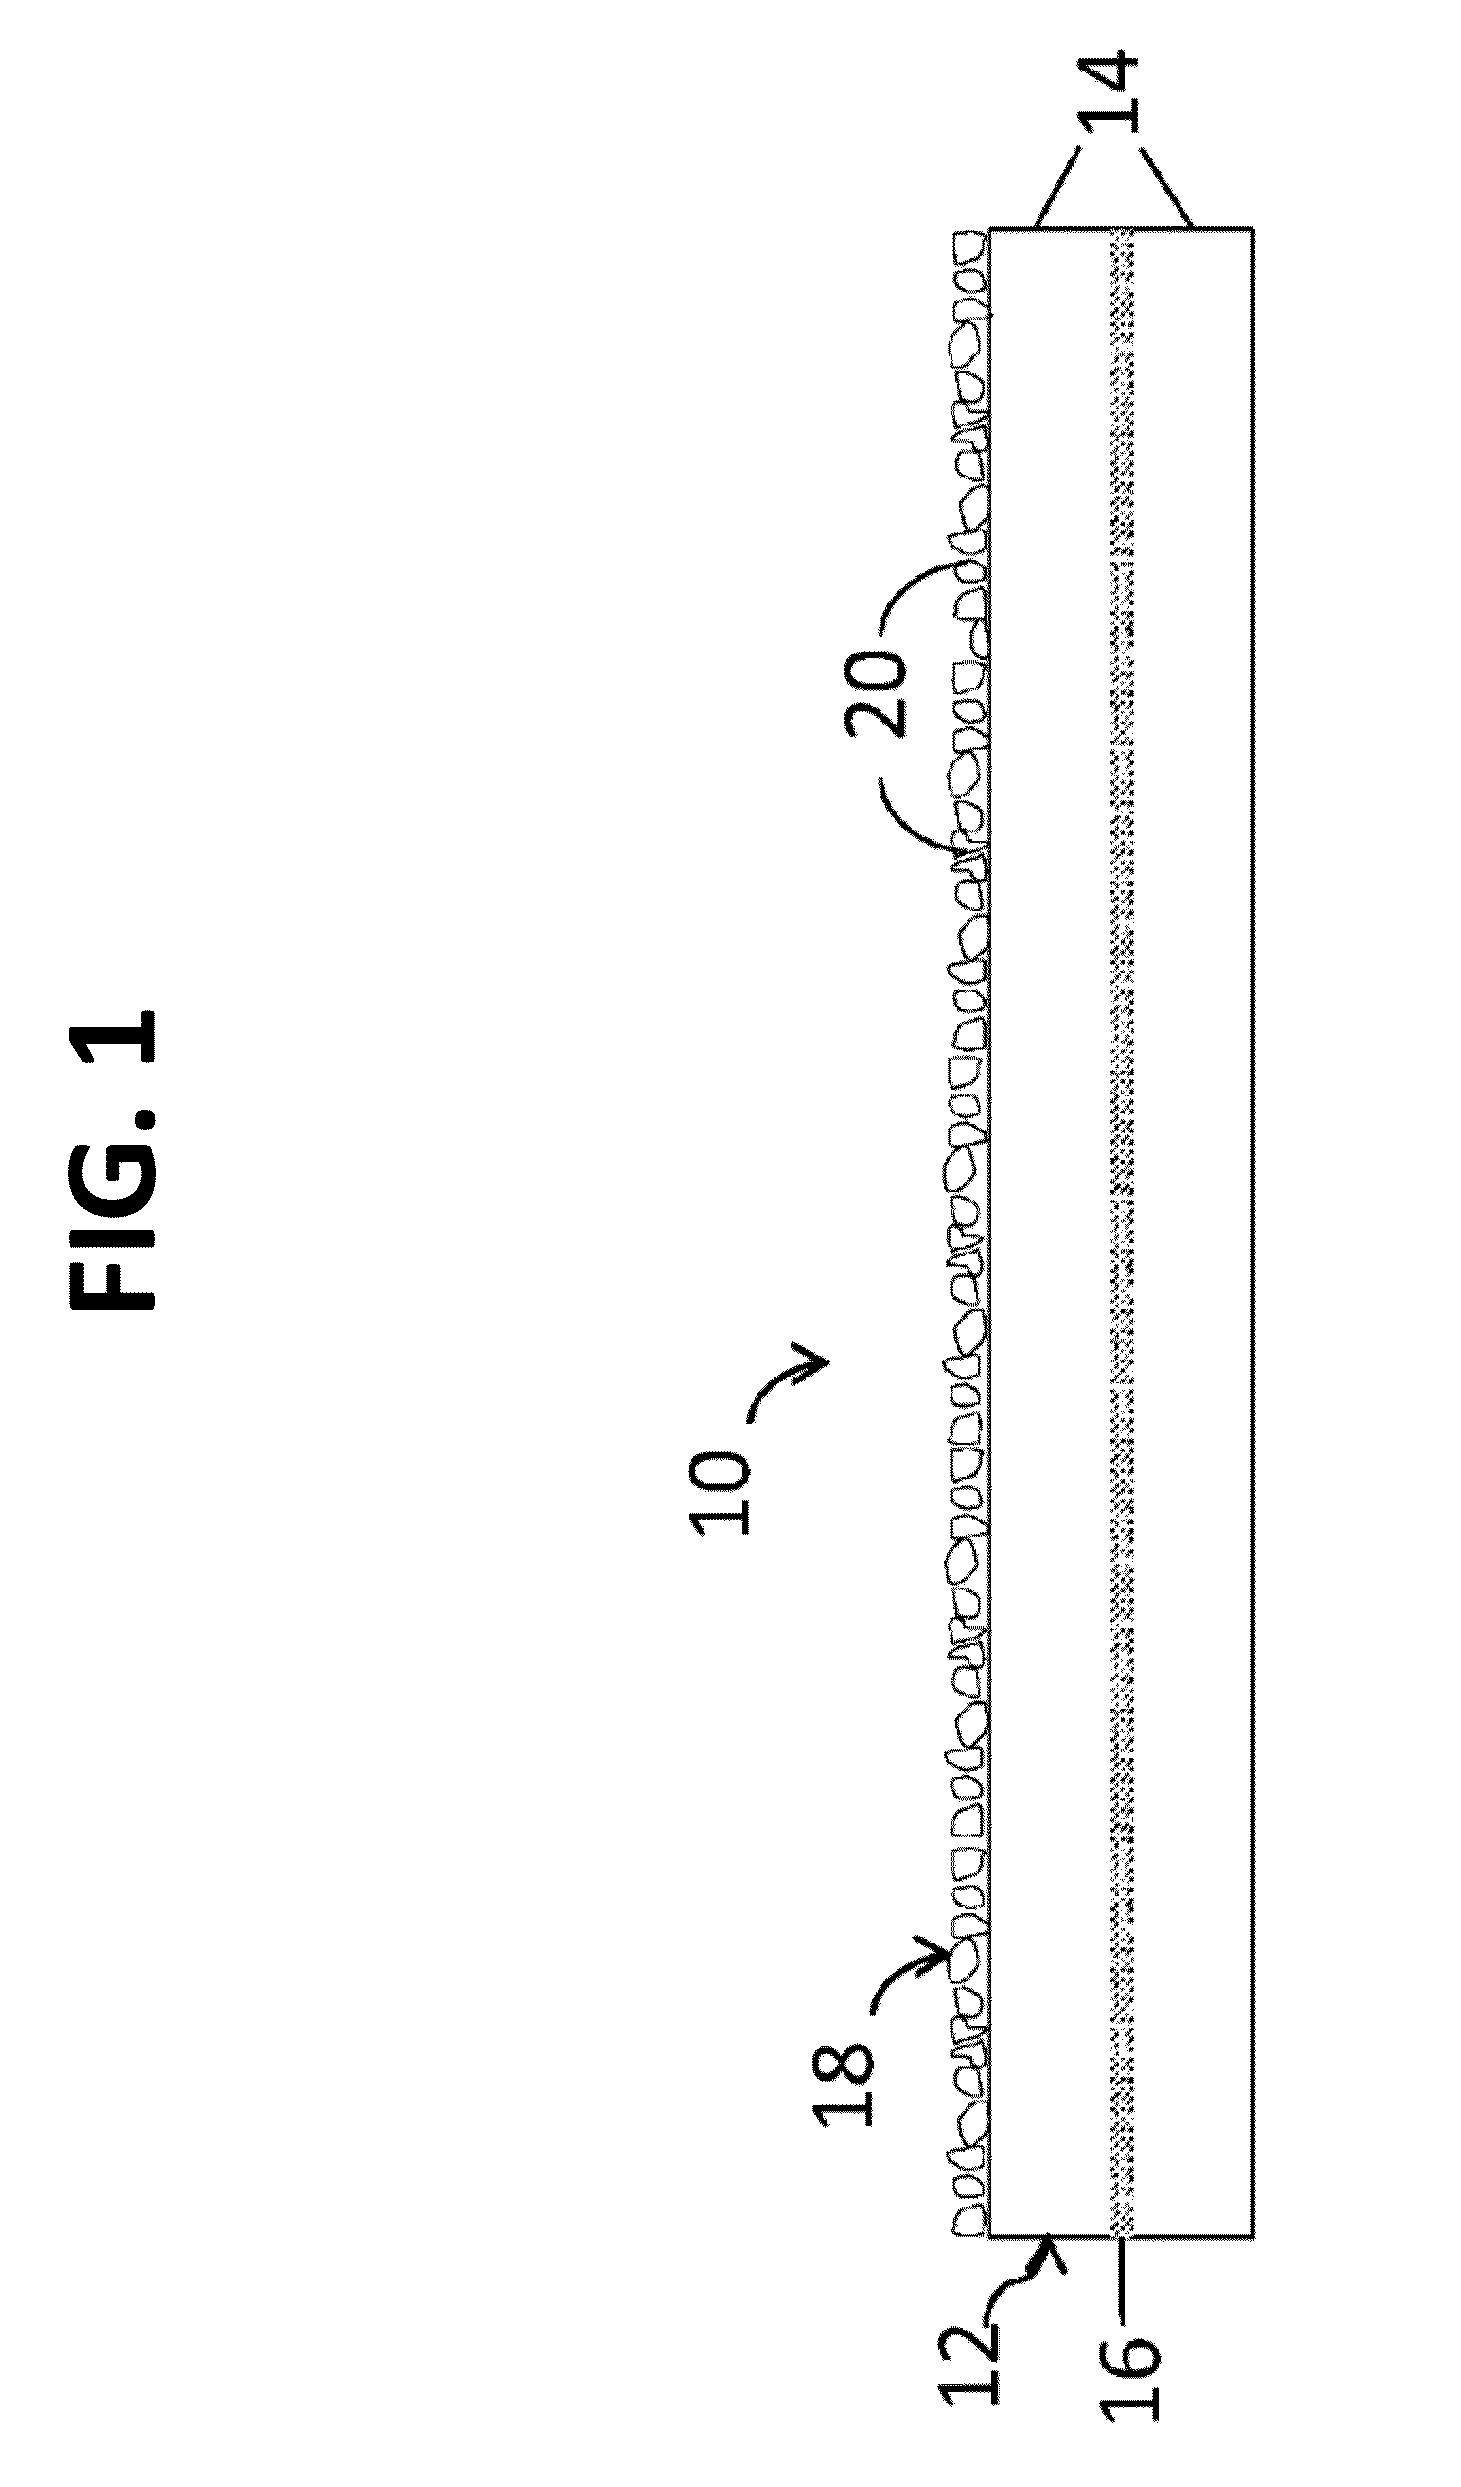 Highly reflective microcrystalline/amorphous materials, and methods for making and using the same